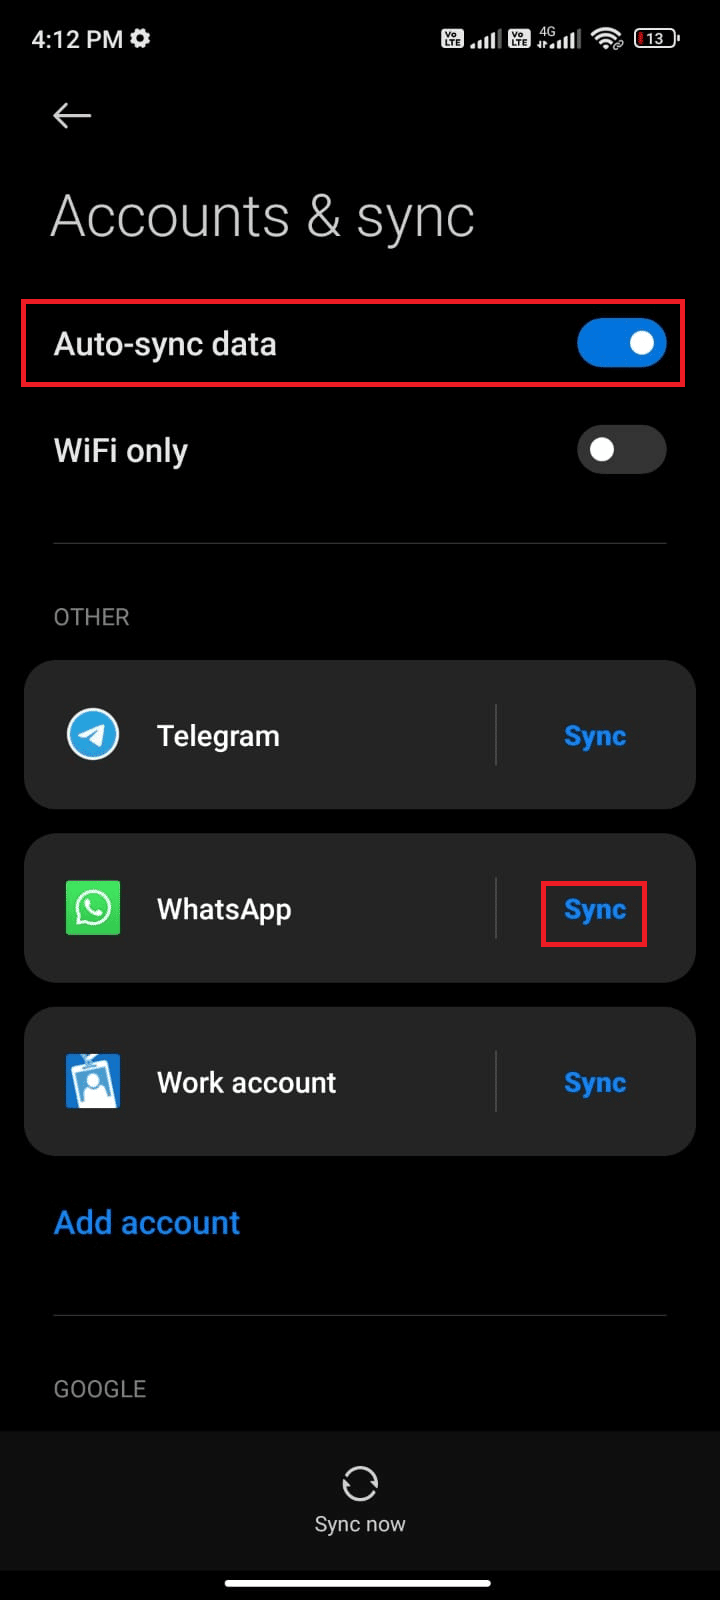 tap on the Sync option next to WhatsApp